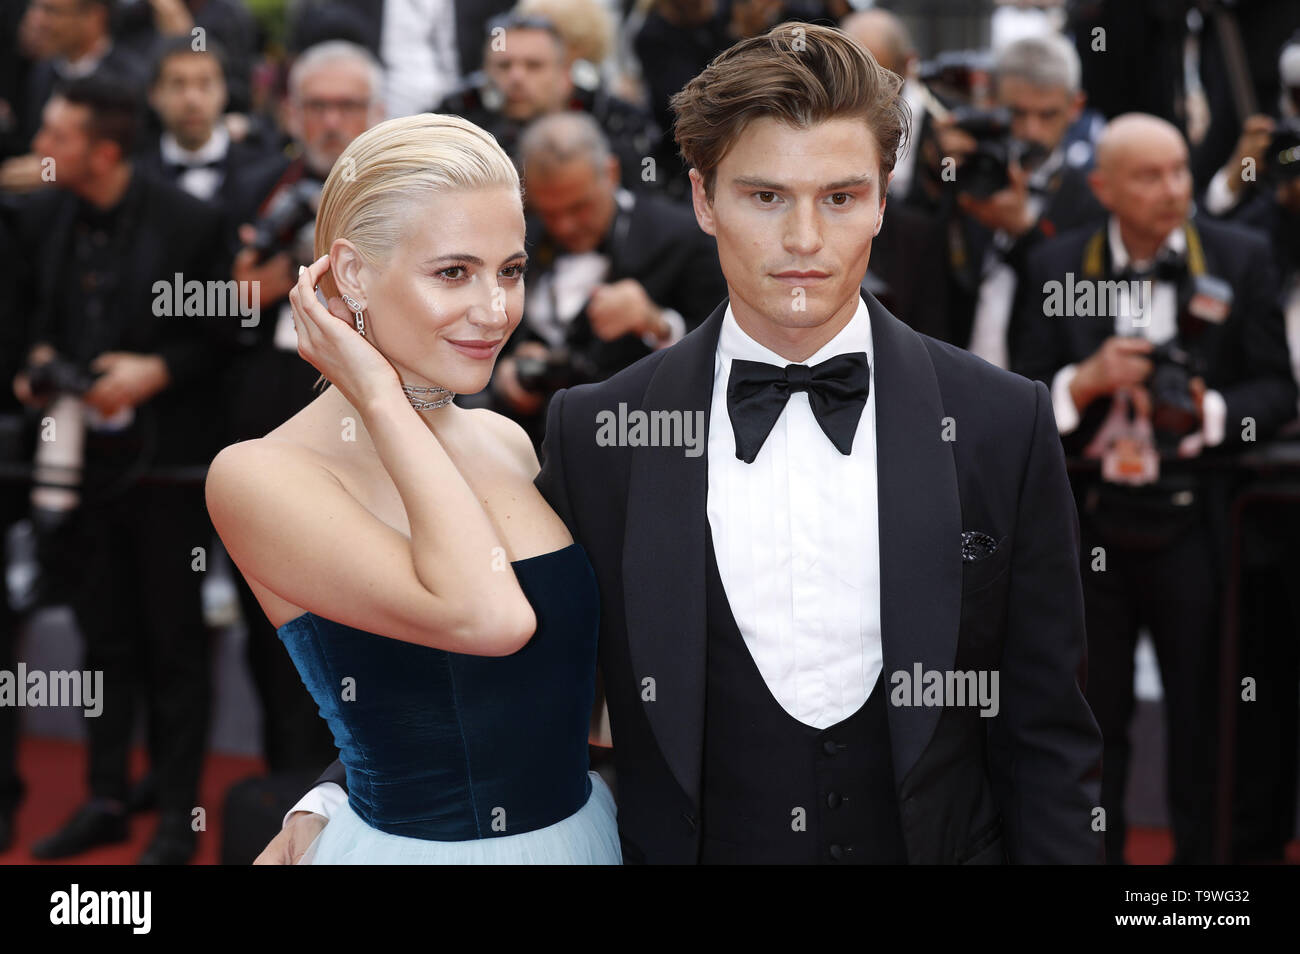 Cannes, France. 20th May, 2019. Oliver Cheshir and Pixie Lott attending the 'La belle époque' premiere during the 72nd Cannes Film Festival at the Palais des Festivals on May 20, 2019 in Cannes, France | usage worldwide Credit: dpa/Alamy Live News Stock Photo